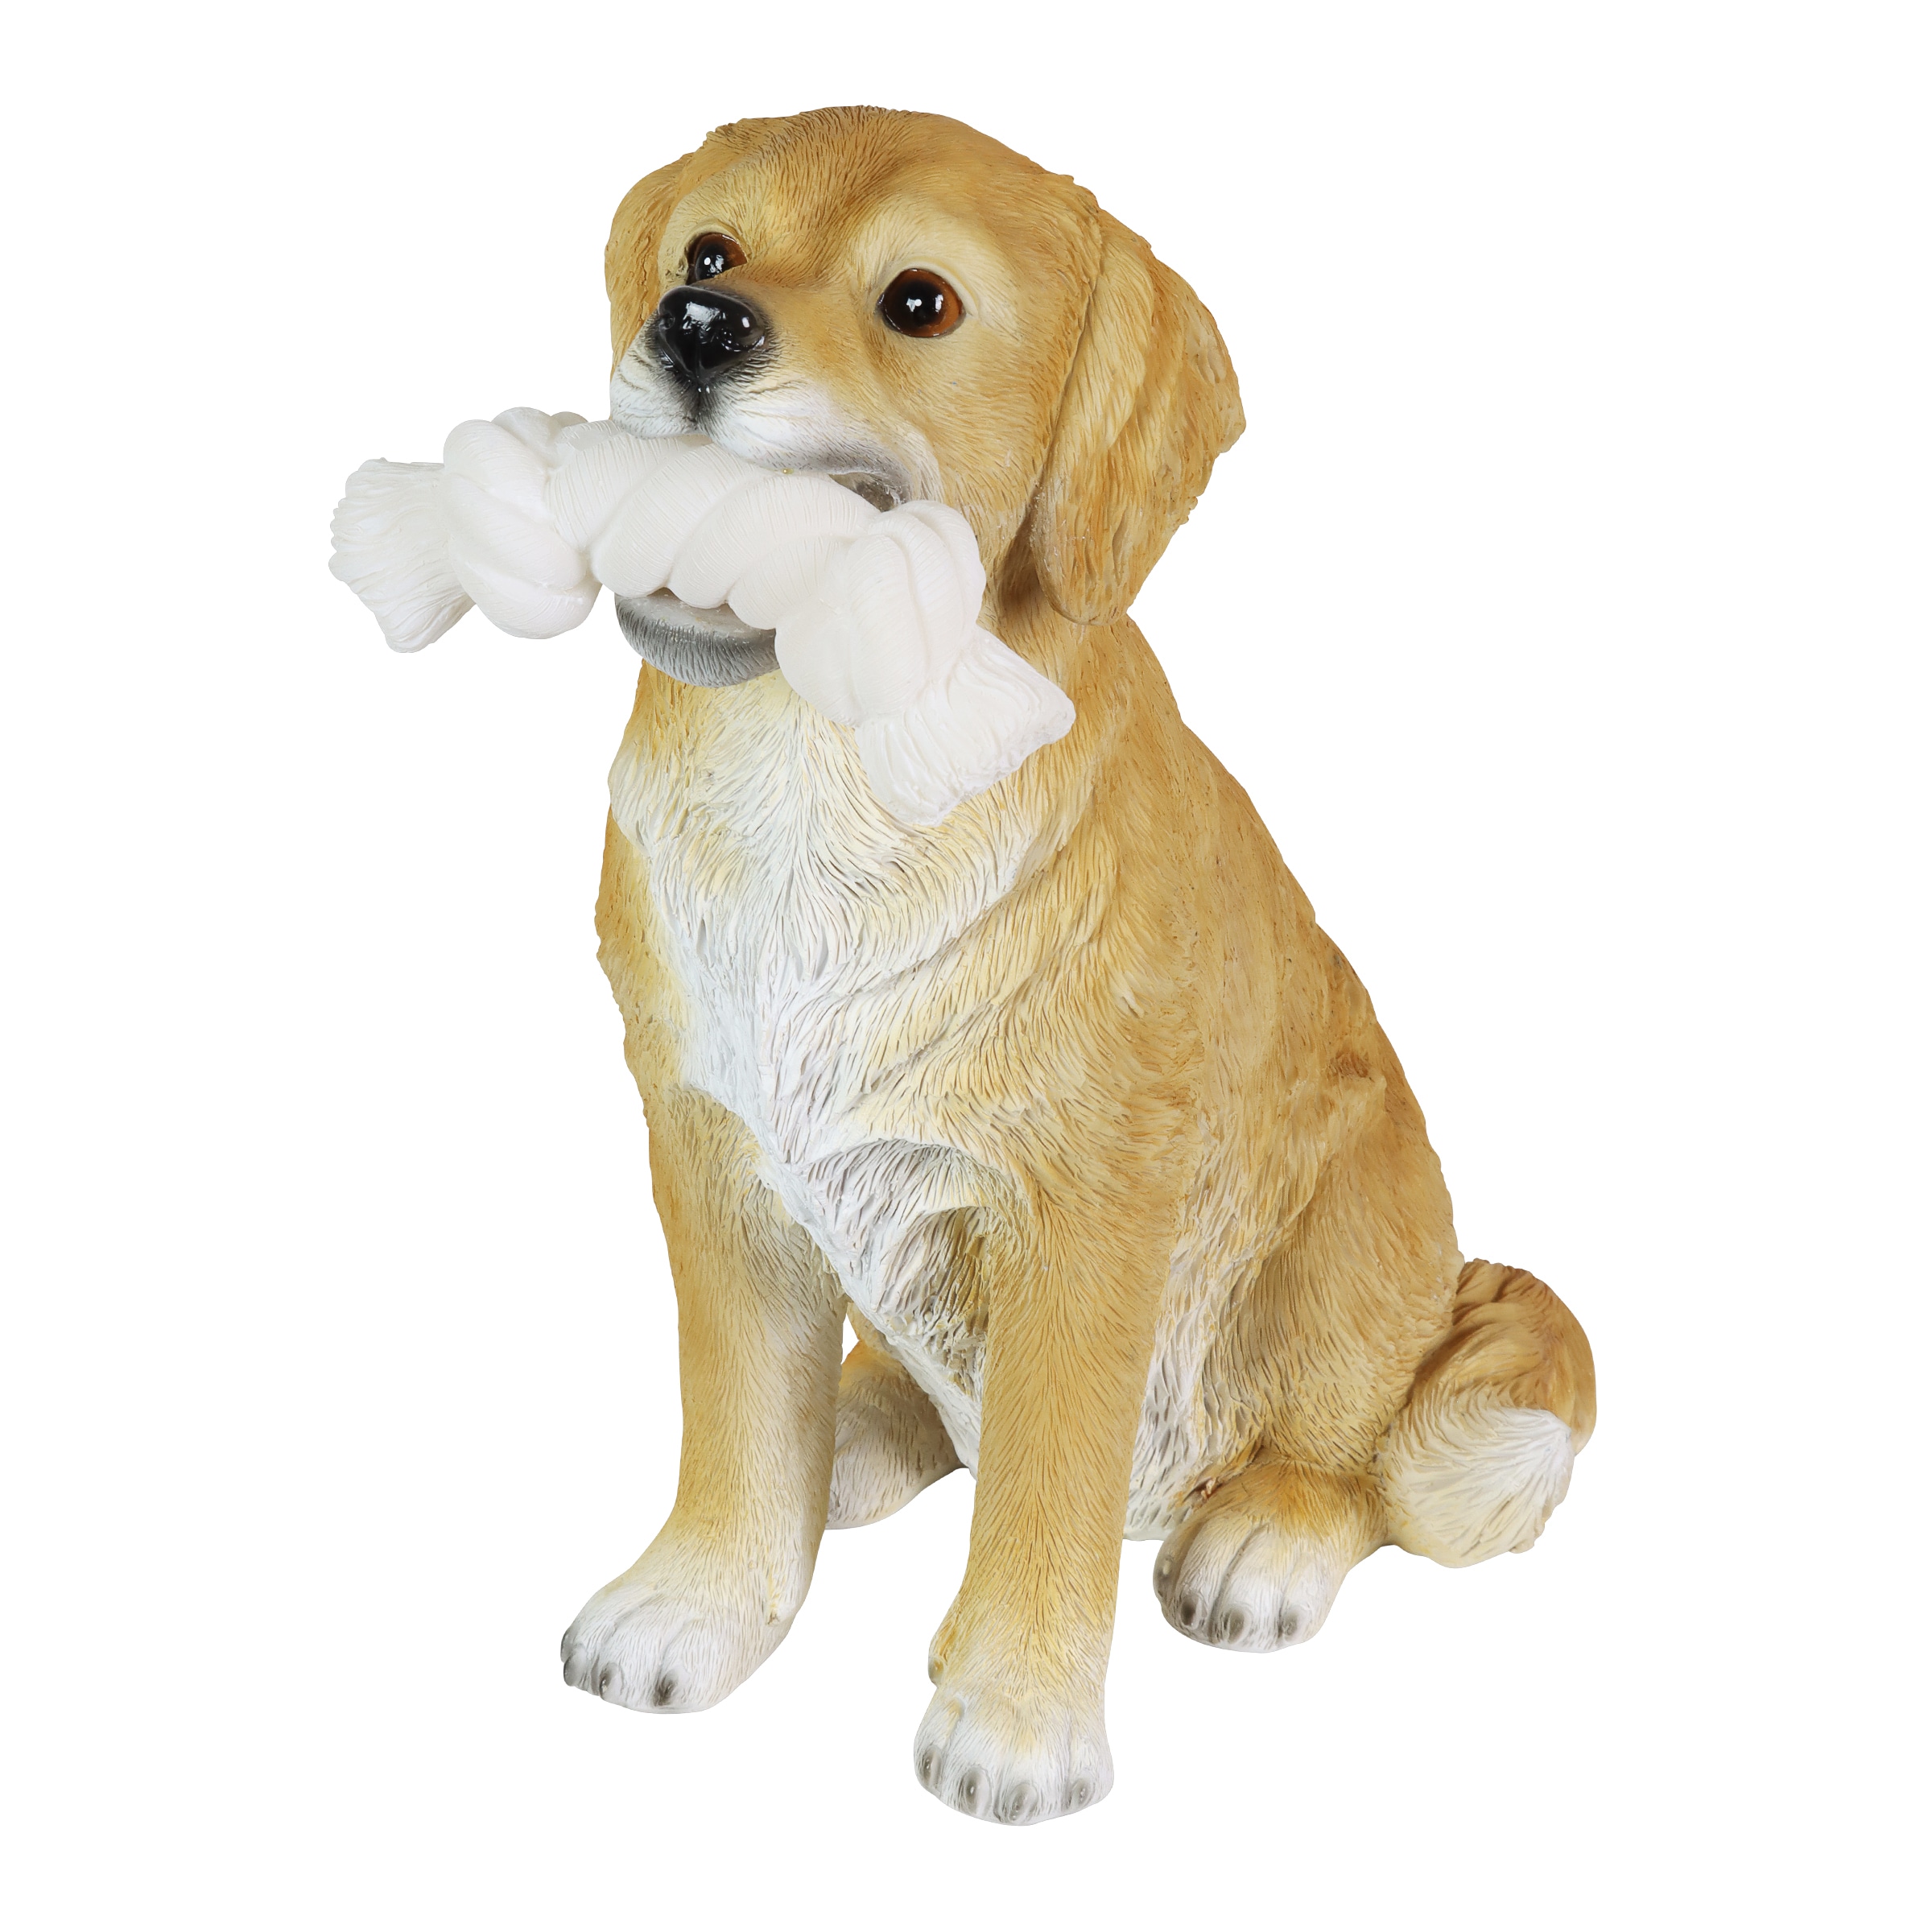 Exhart 13.98-in H x 7.87-in W Dog Garden Statue at Lowes.com